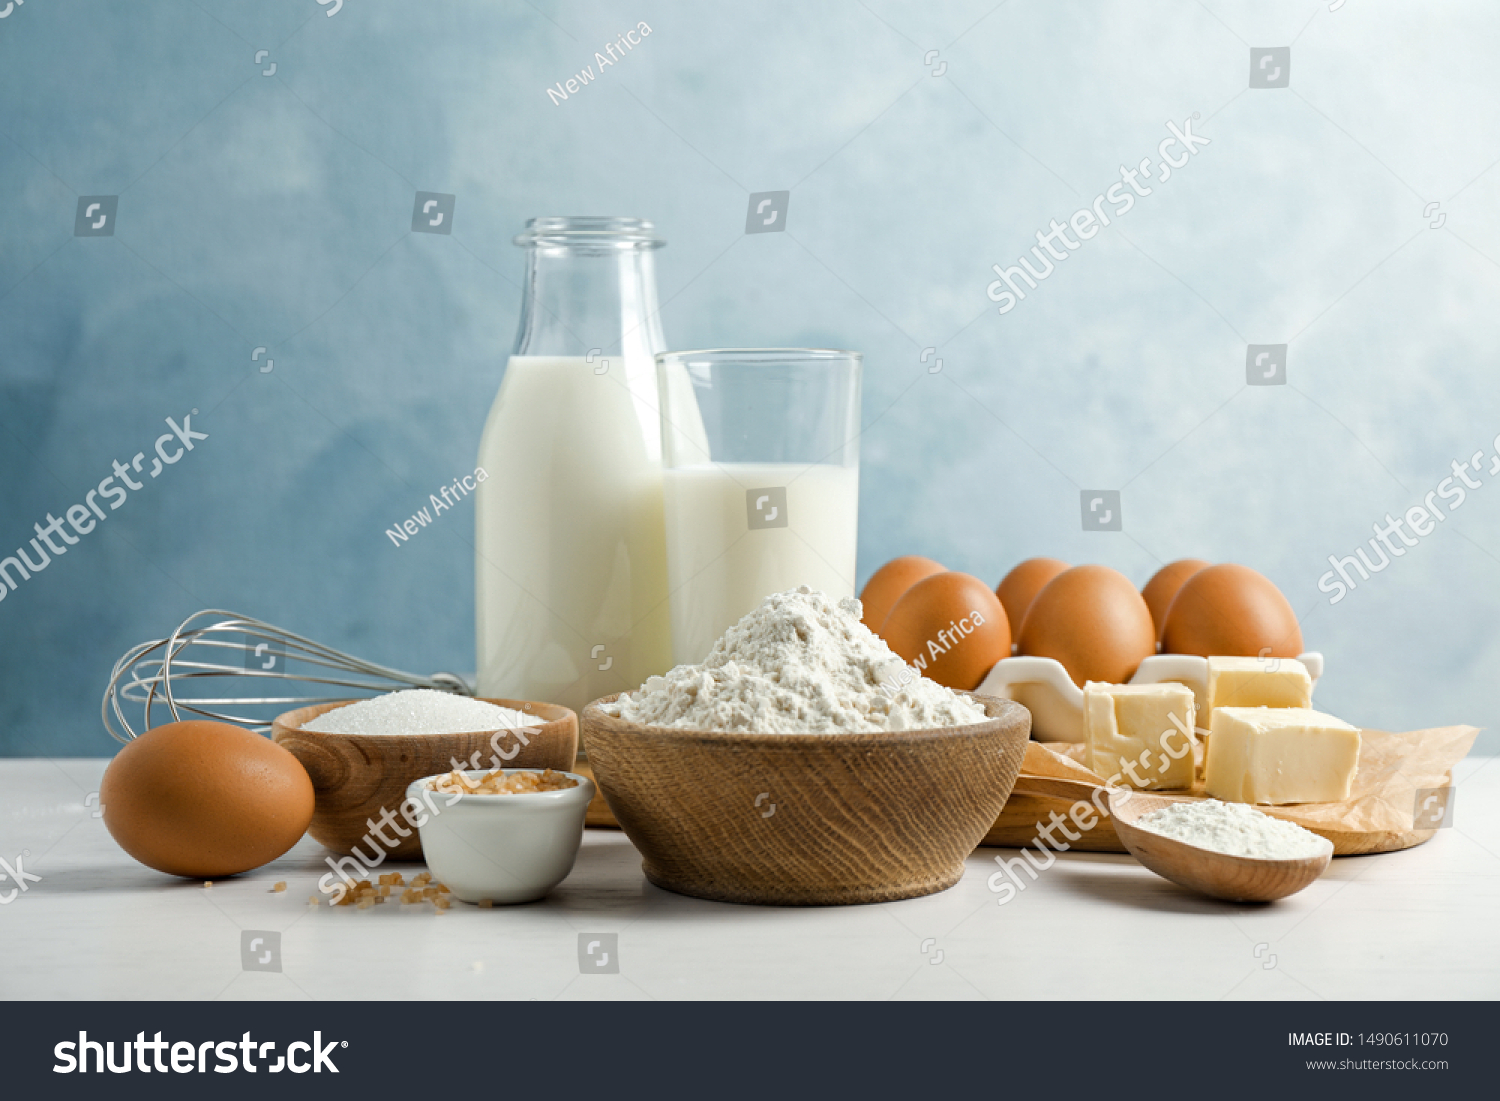 Fresh ingredients for delicious homemade cake on white wooden table against blue background #1490611070